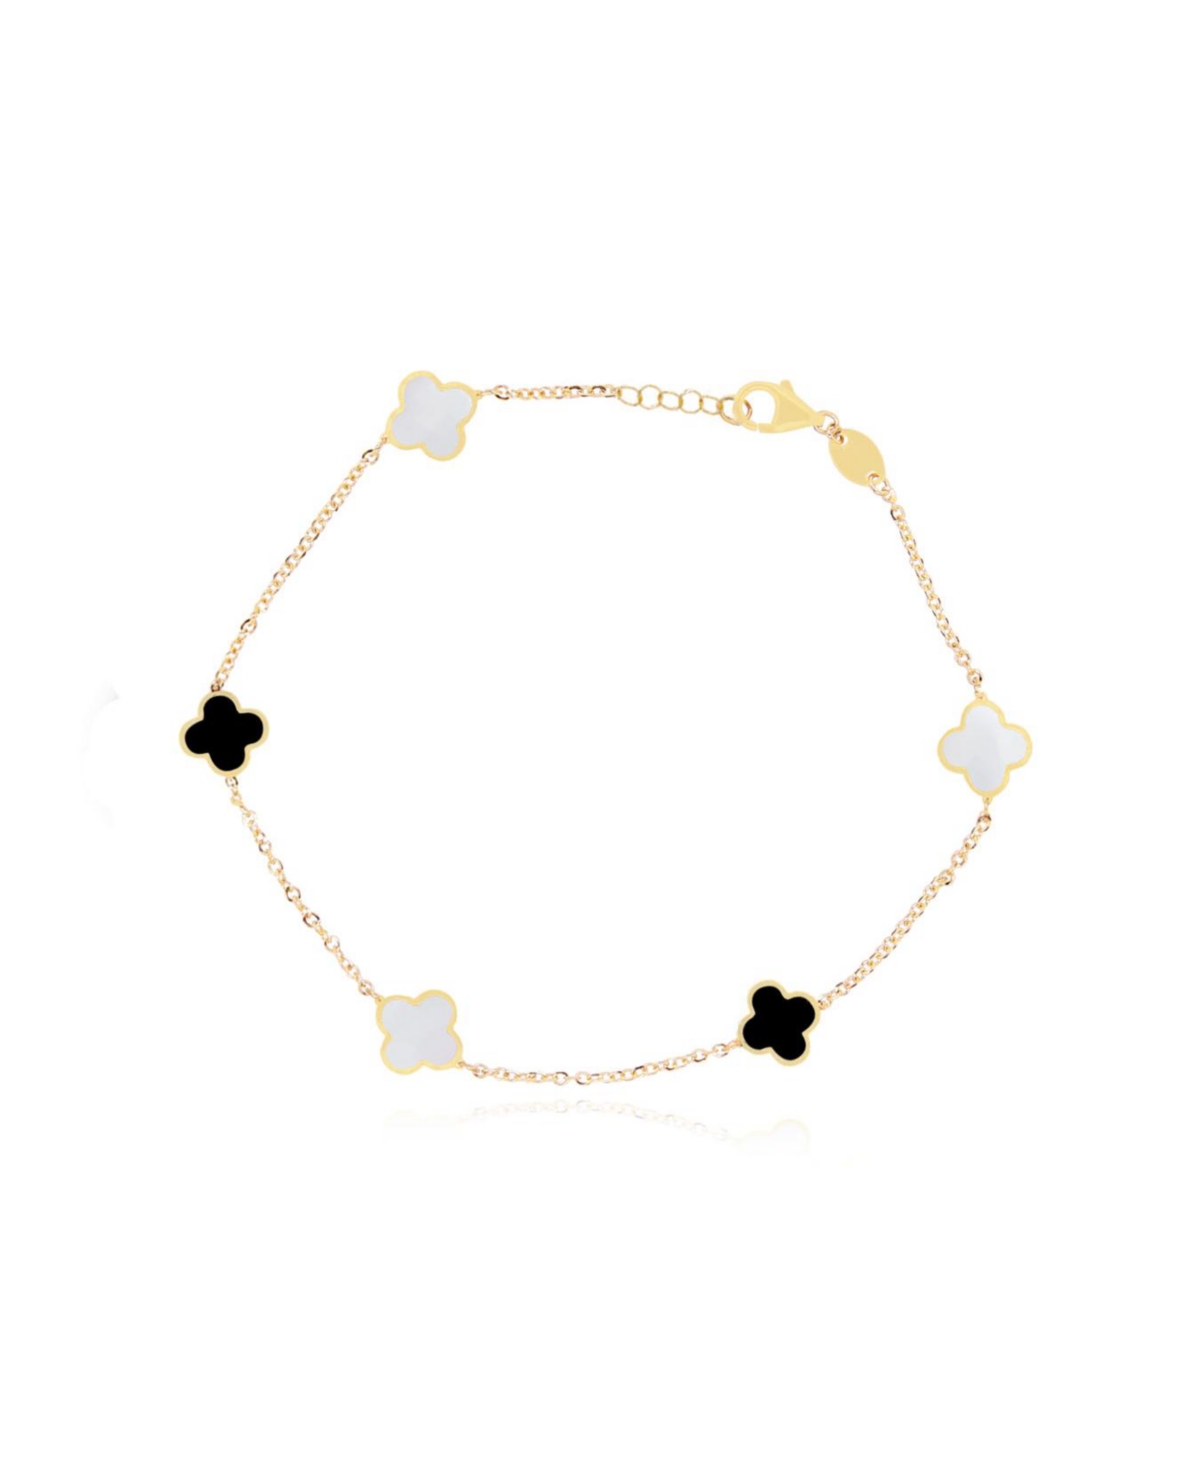 THE LOVERY MINI MOTHER OF PEARL AND ONYX MIXED CLOVER BRACELET